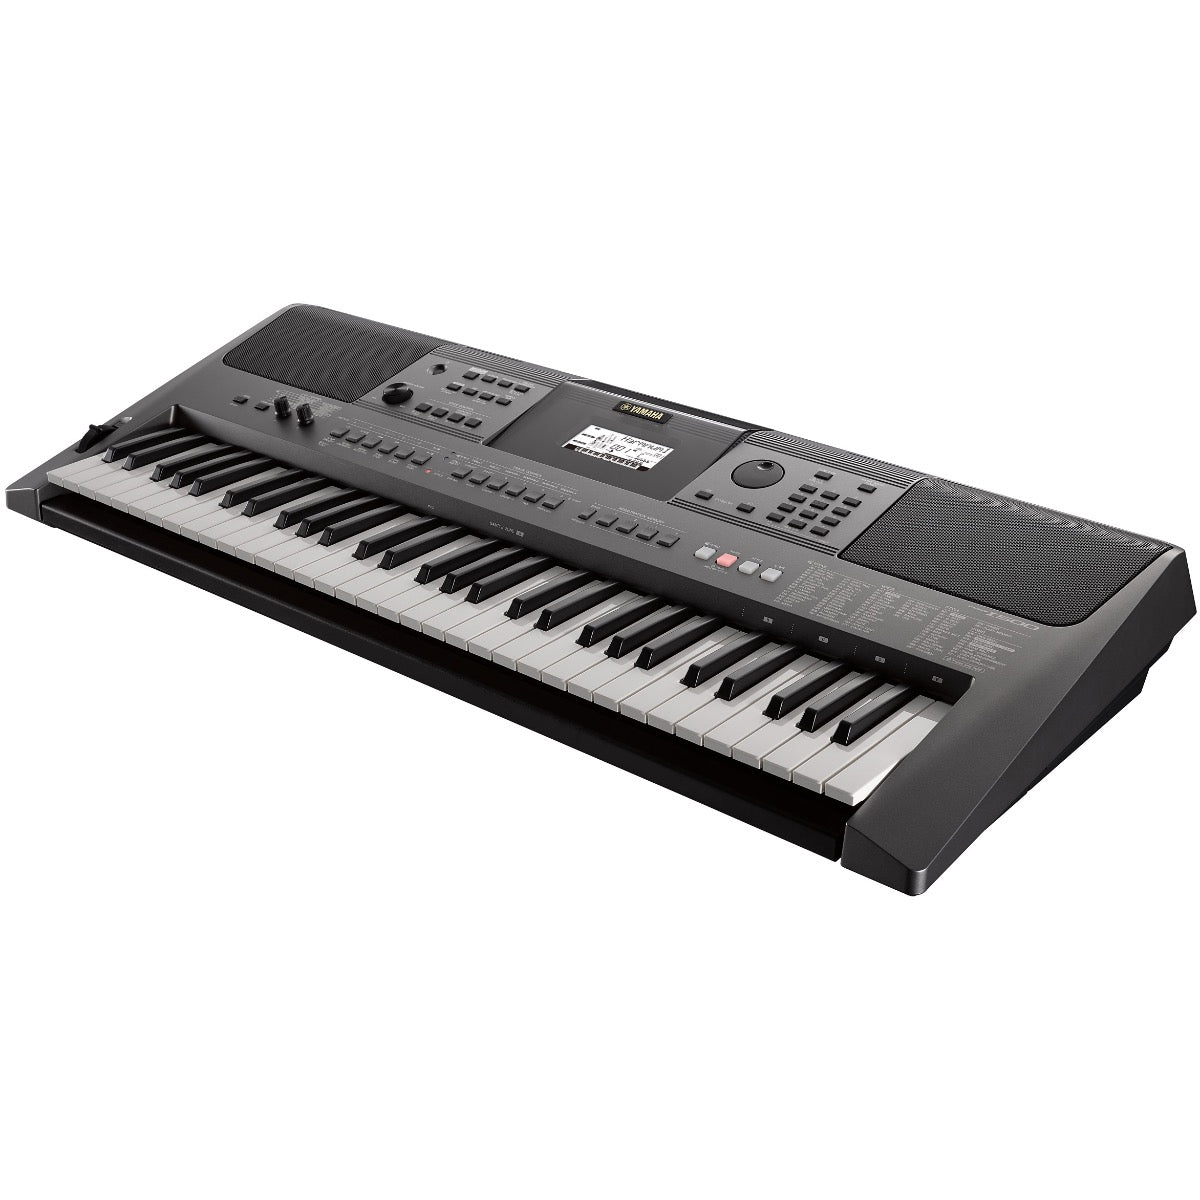 3/4 view of Yamaha PSR-I500 Portable Keyboard showing top, front and right side